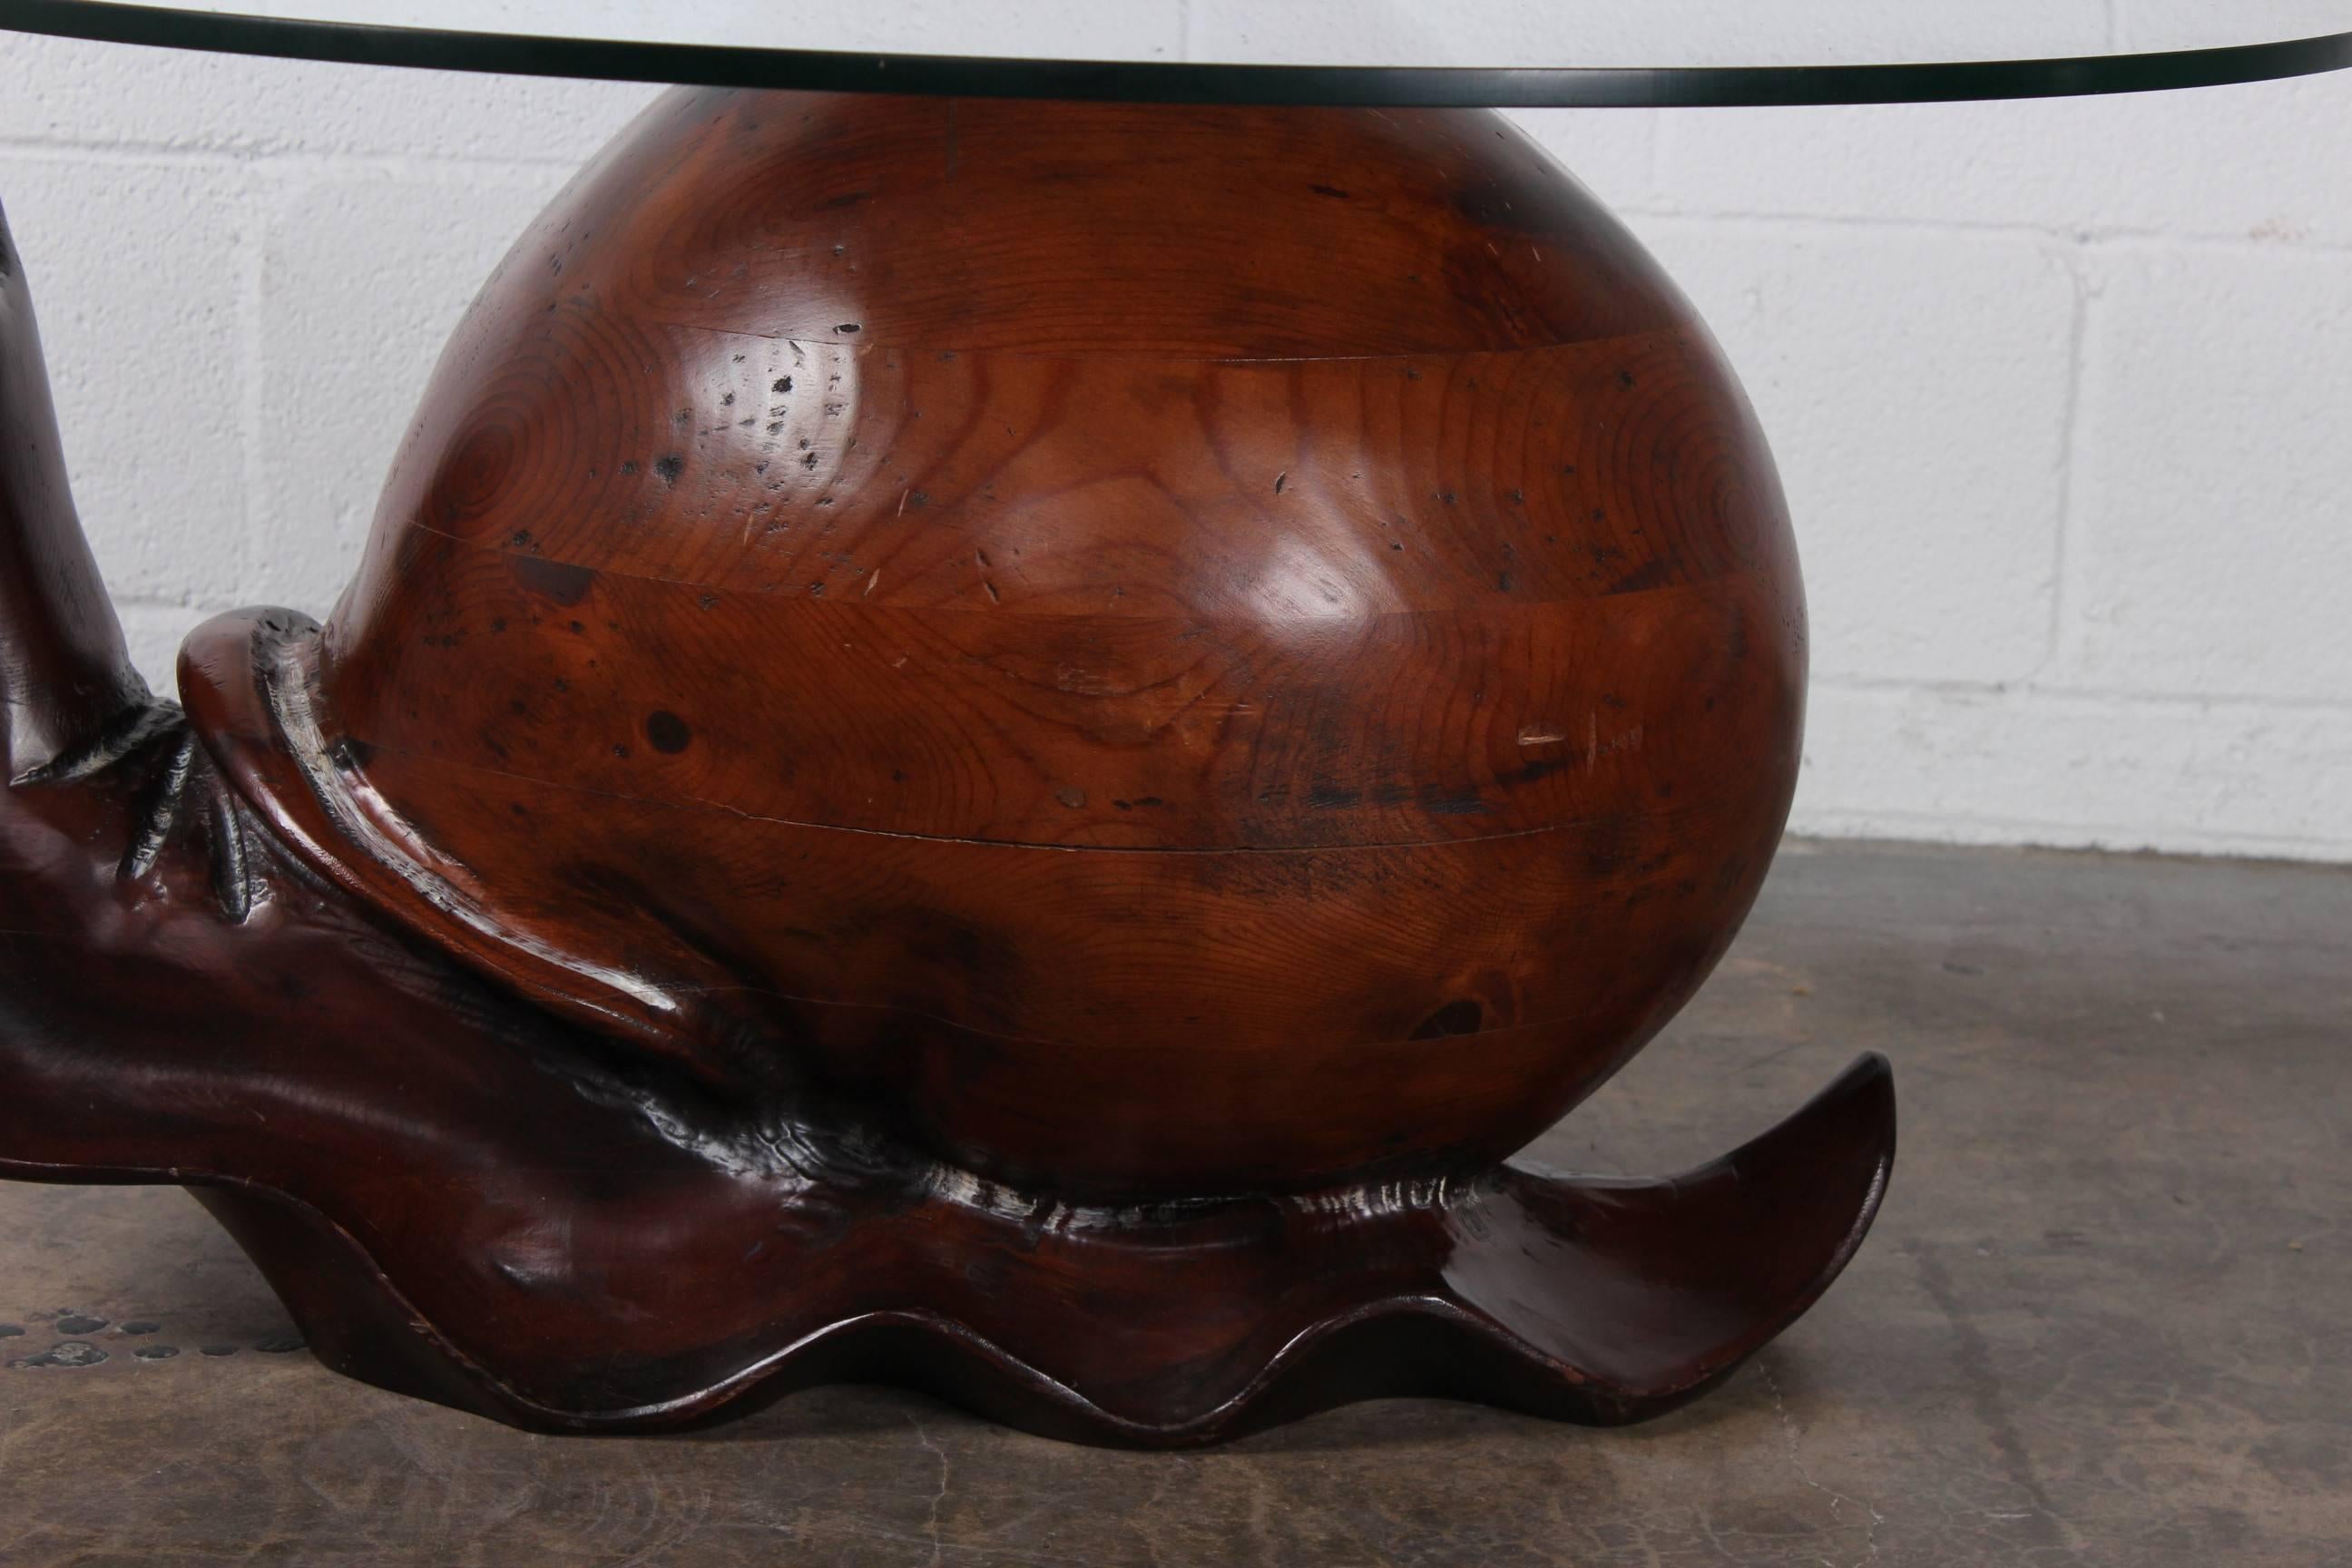 A hand-carved wooden snail table by Federico Armijo.